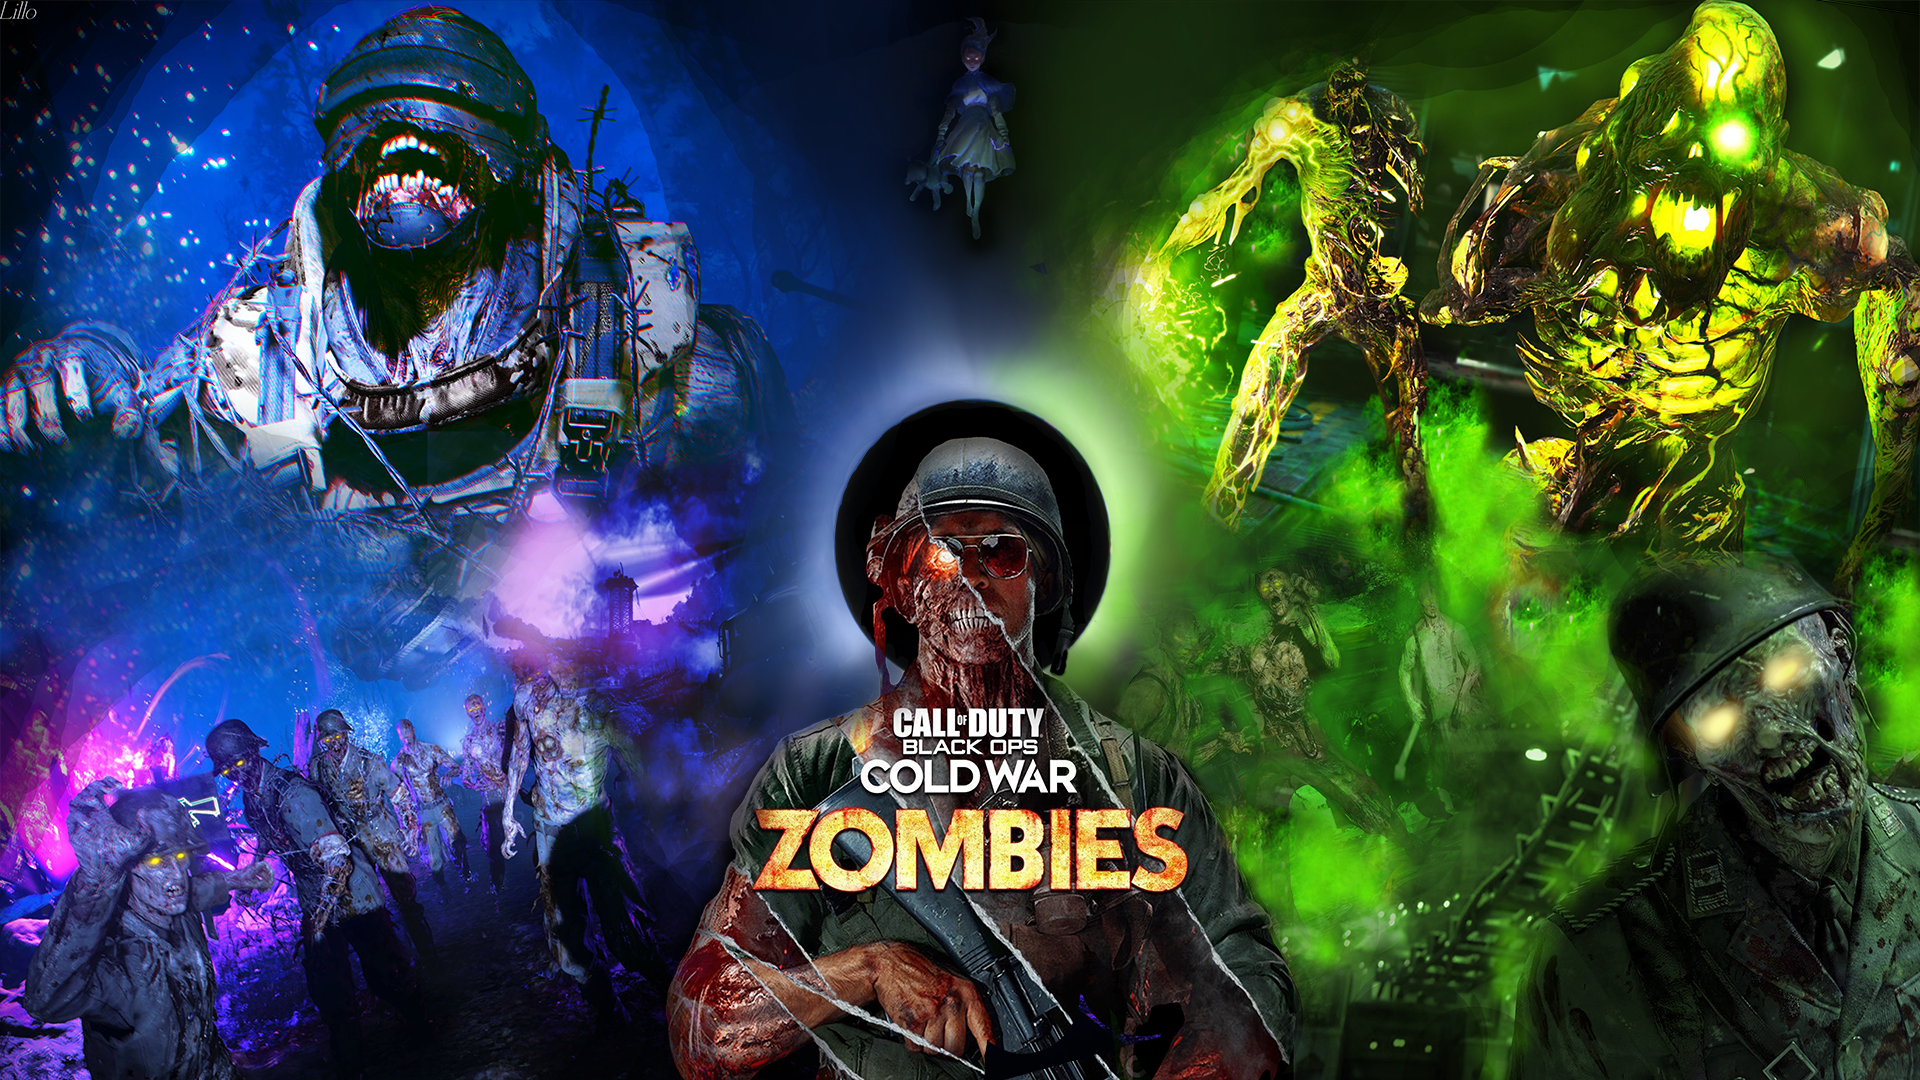 Video Games PC Gaming Collage Zombies Undead Call Of Duty Black Ops Cold War Zombies 1920x1080